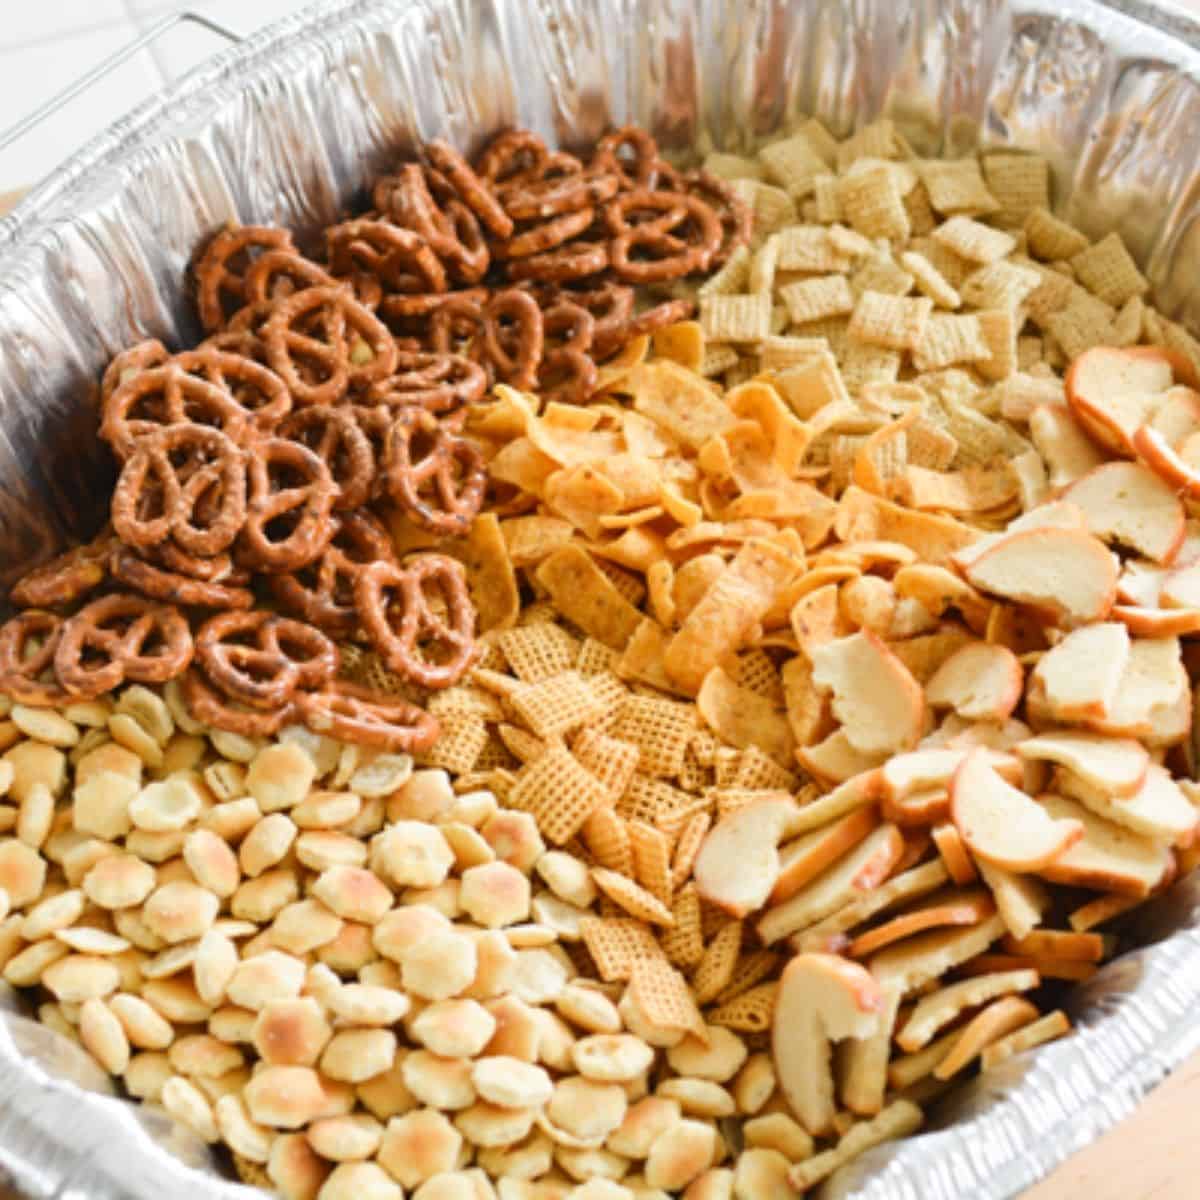 https://www.cupcakesandcutlery.com/wp-content/uploads/2020/10/Old-Bay-Chex-Mix-Featured-Image.jpg